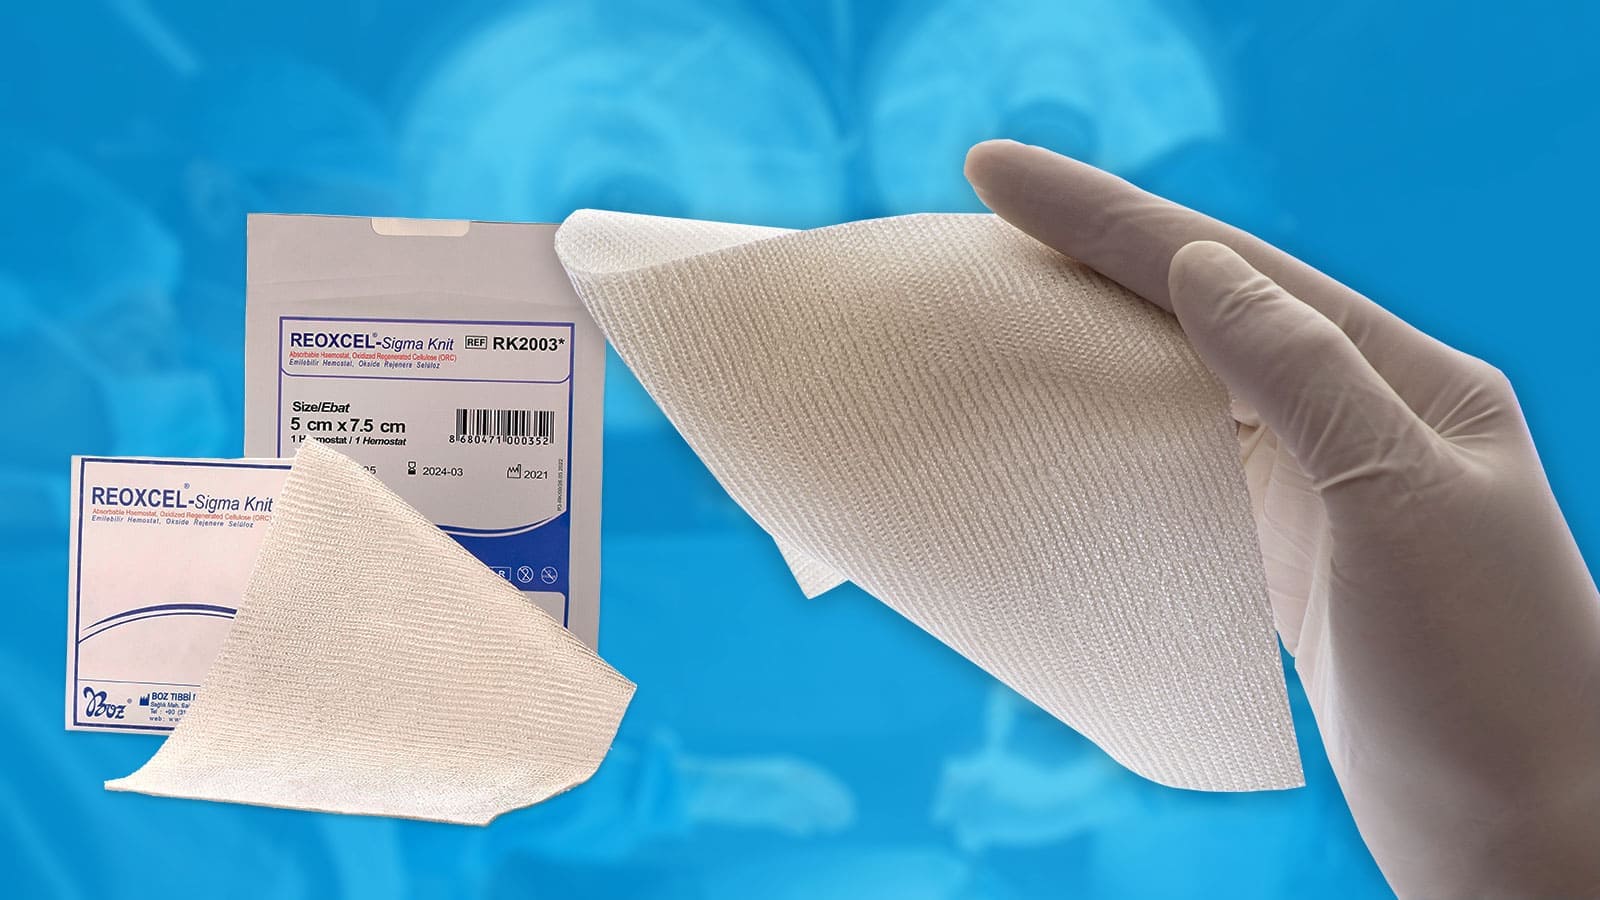 Reoxcel Sigma Knit haemostat with plain texture and thick knitting can be laid, pressed or sutured on bleeding surfaces.